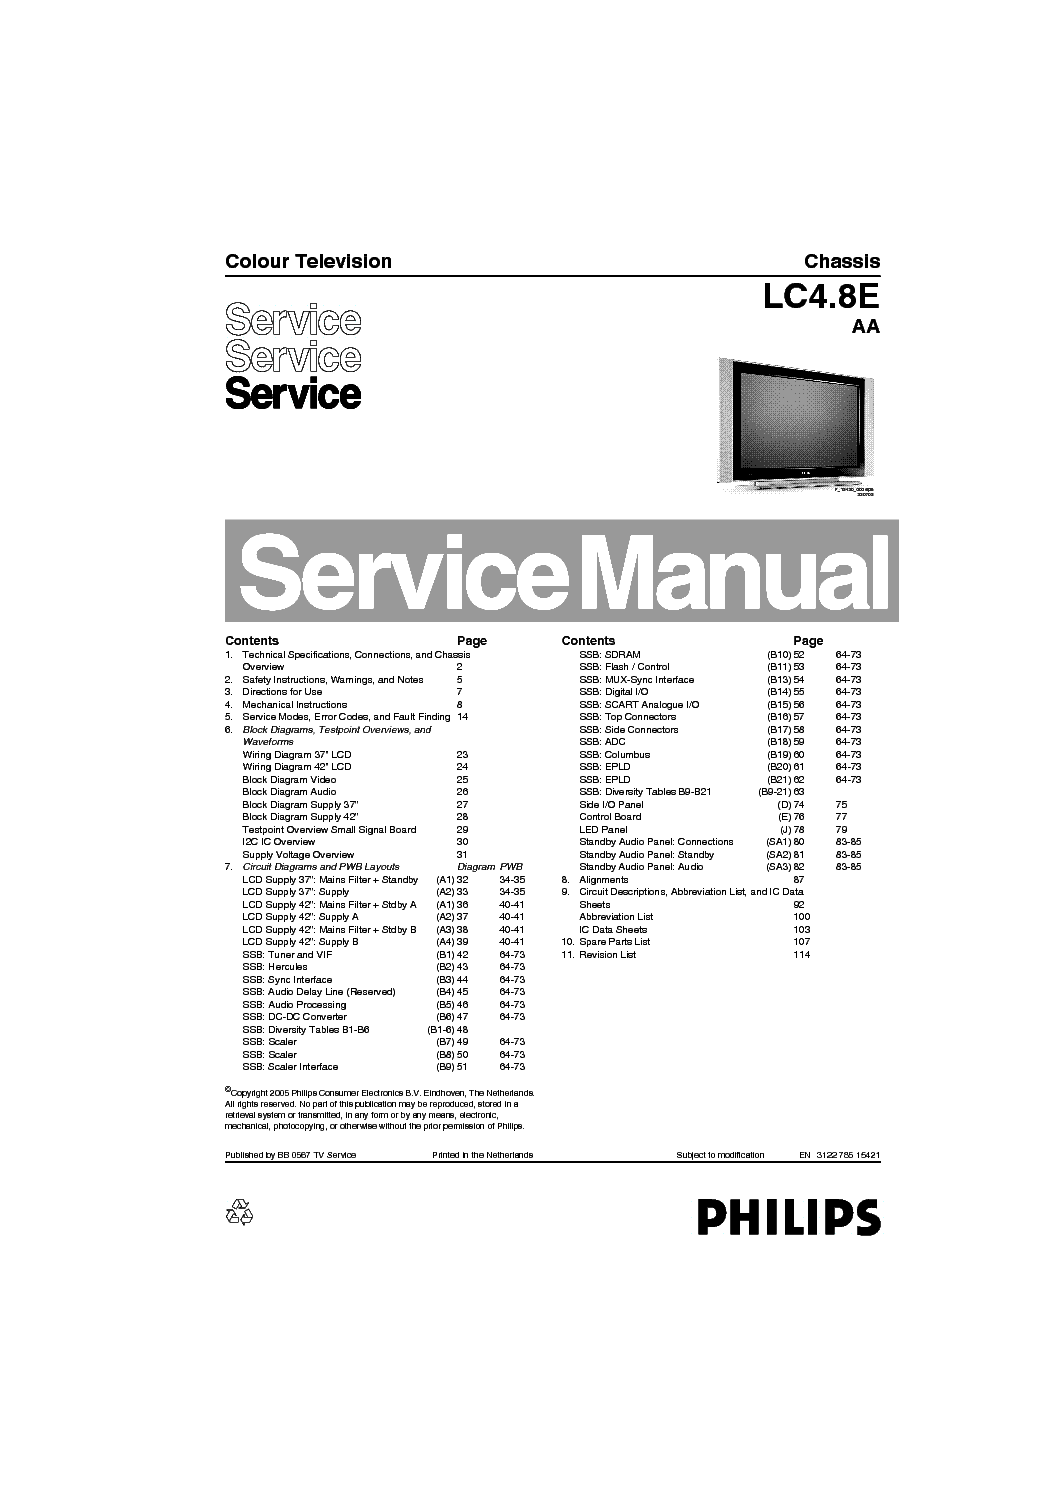 PHILIPS CHASSIS LC4.8E-AA SM service manual (1st page)